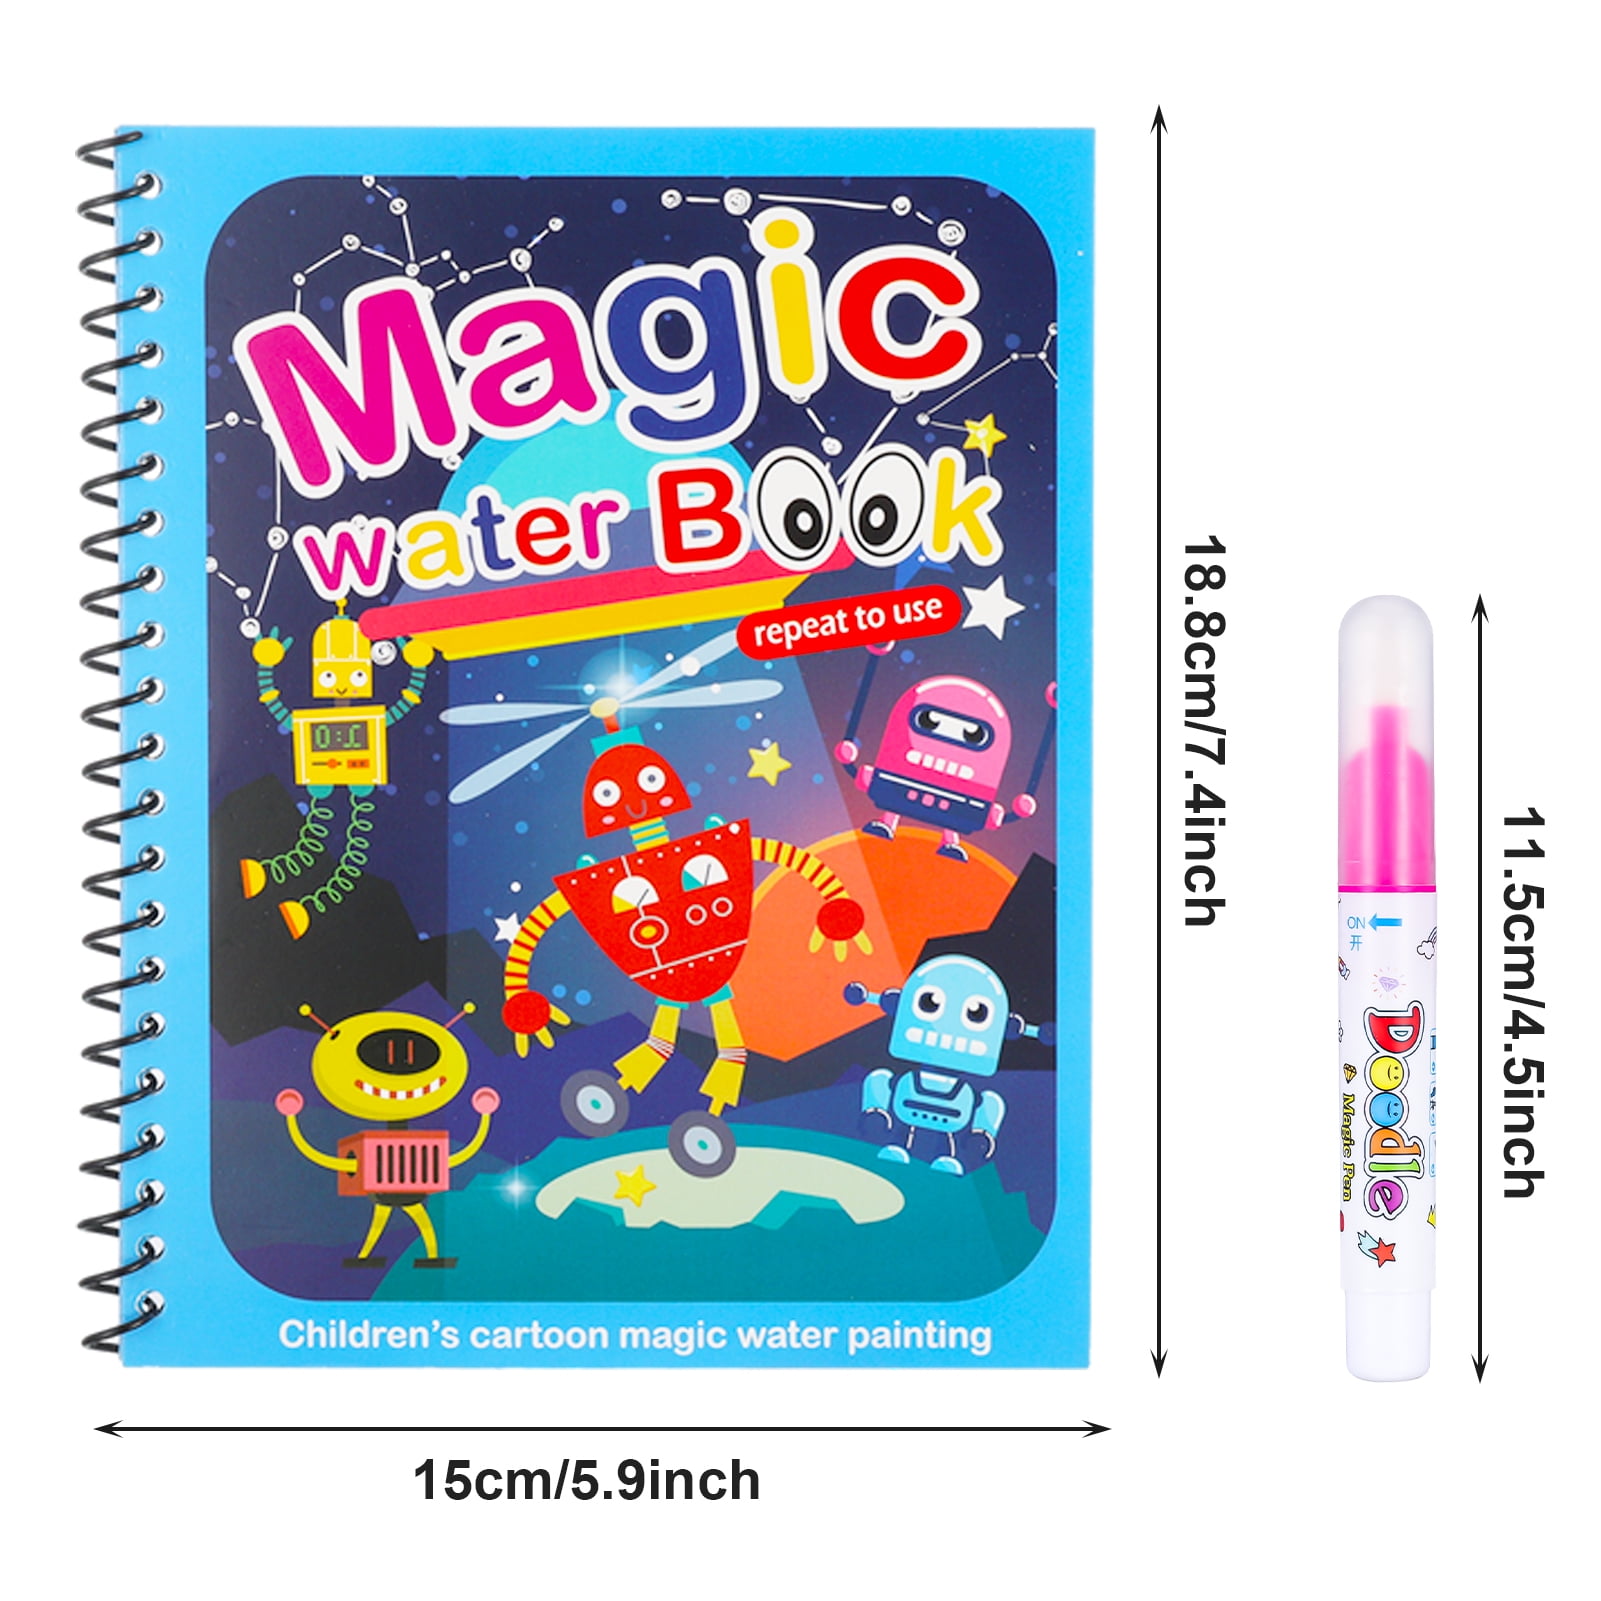 Hequsigns 6pcs Magic Water Coloring Books, Reusable Painting Books with Water Drawing Pen, Educational Coloring Drawing Books Gifts for Kids 3+